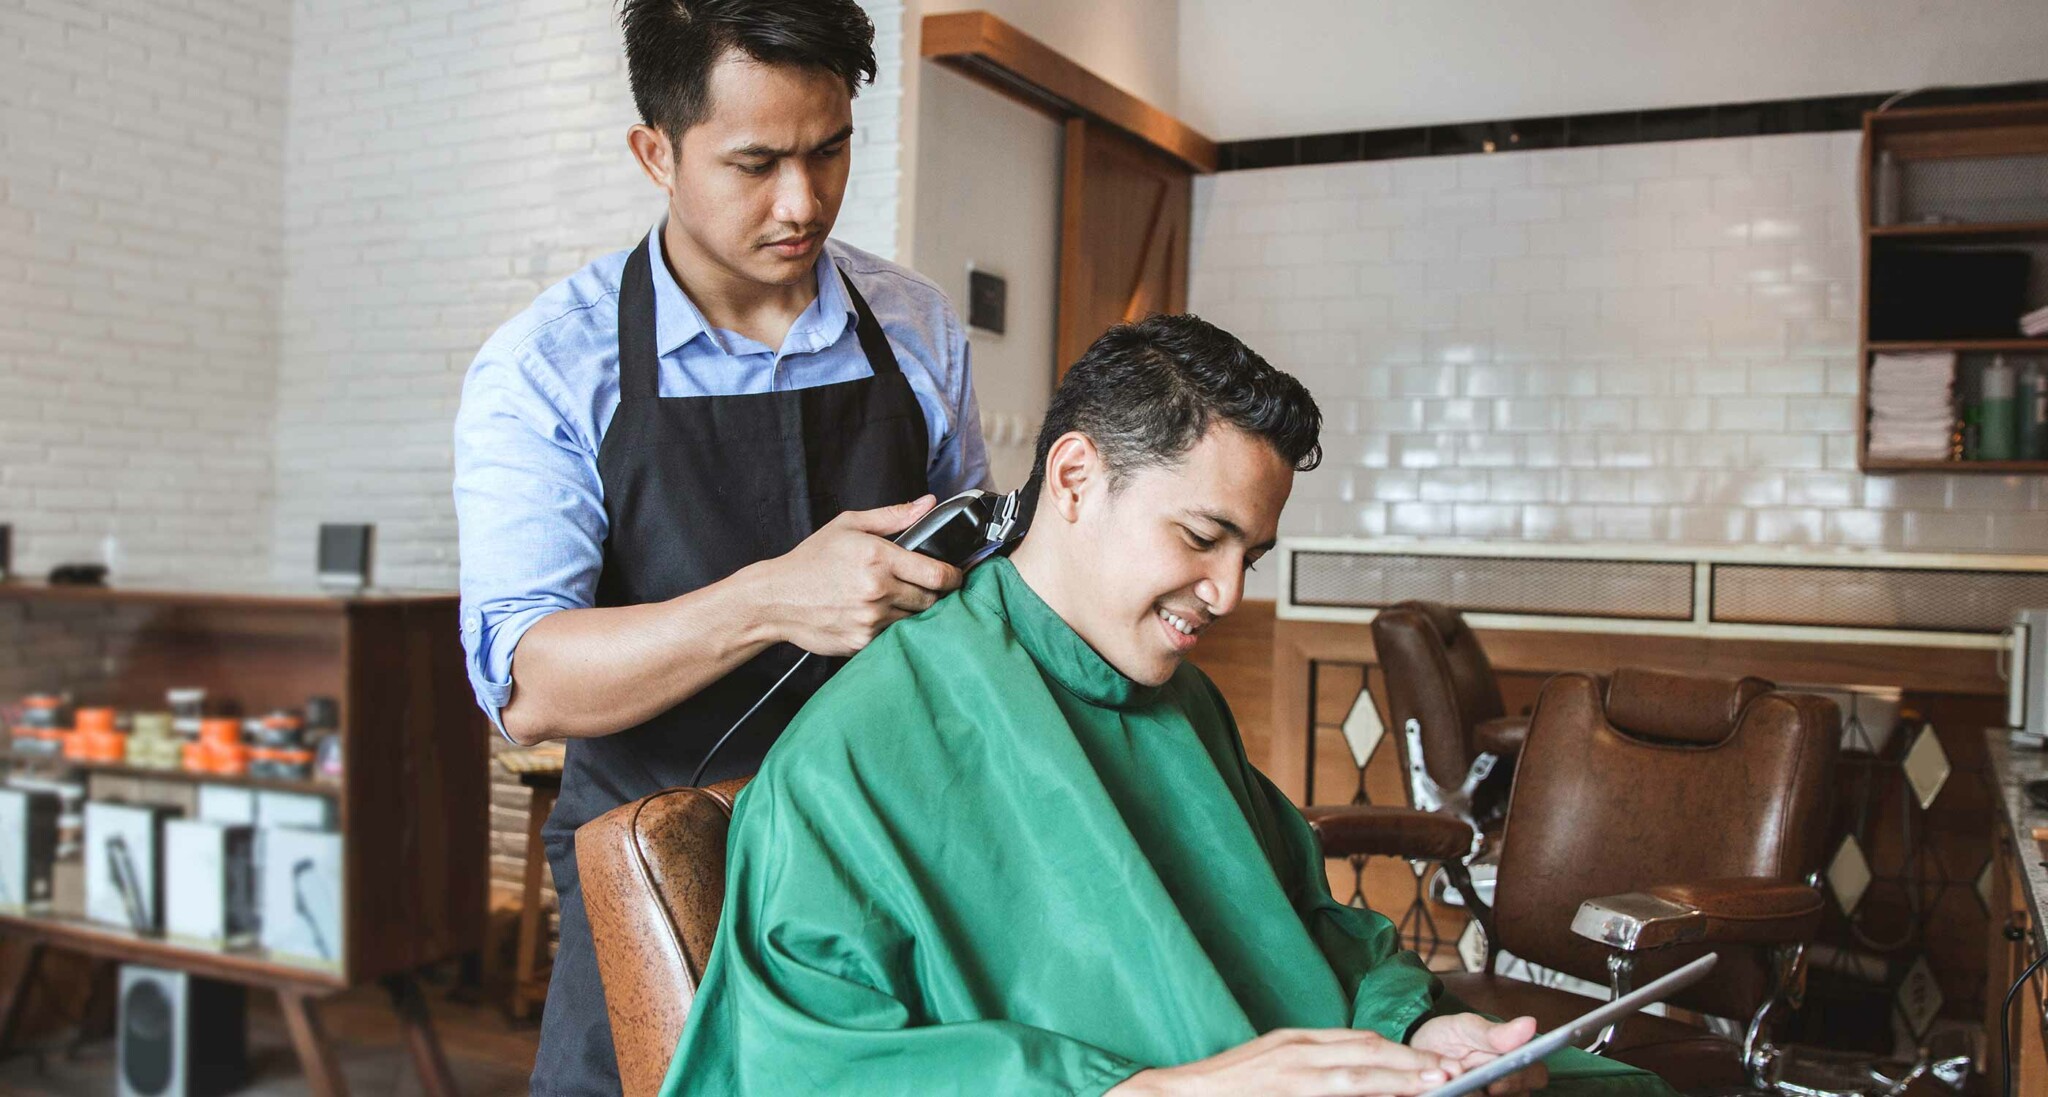 Men’s Haircut Prices: How Much Will It Cost You? - StyleSeat